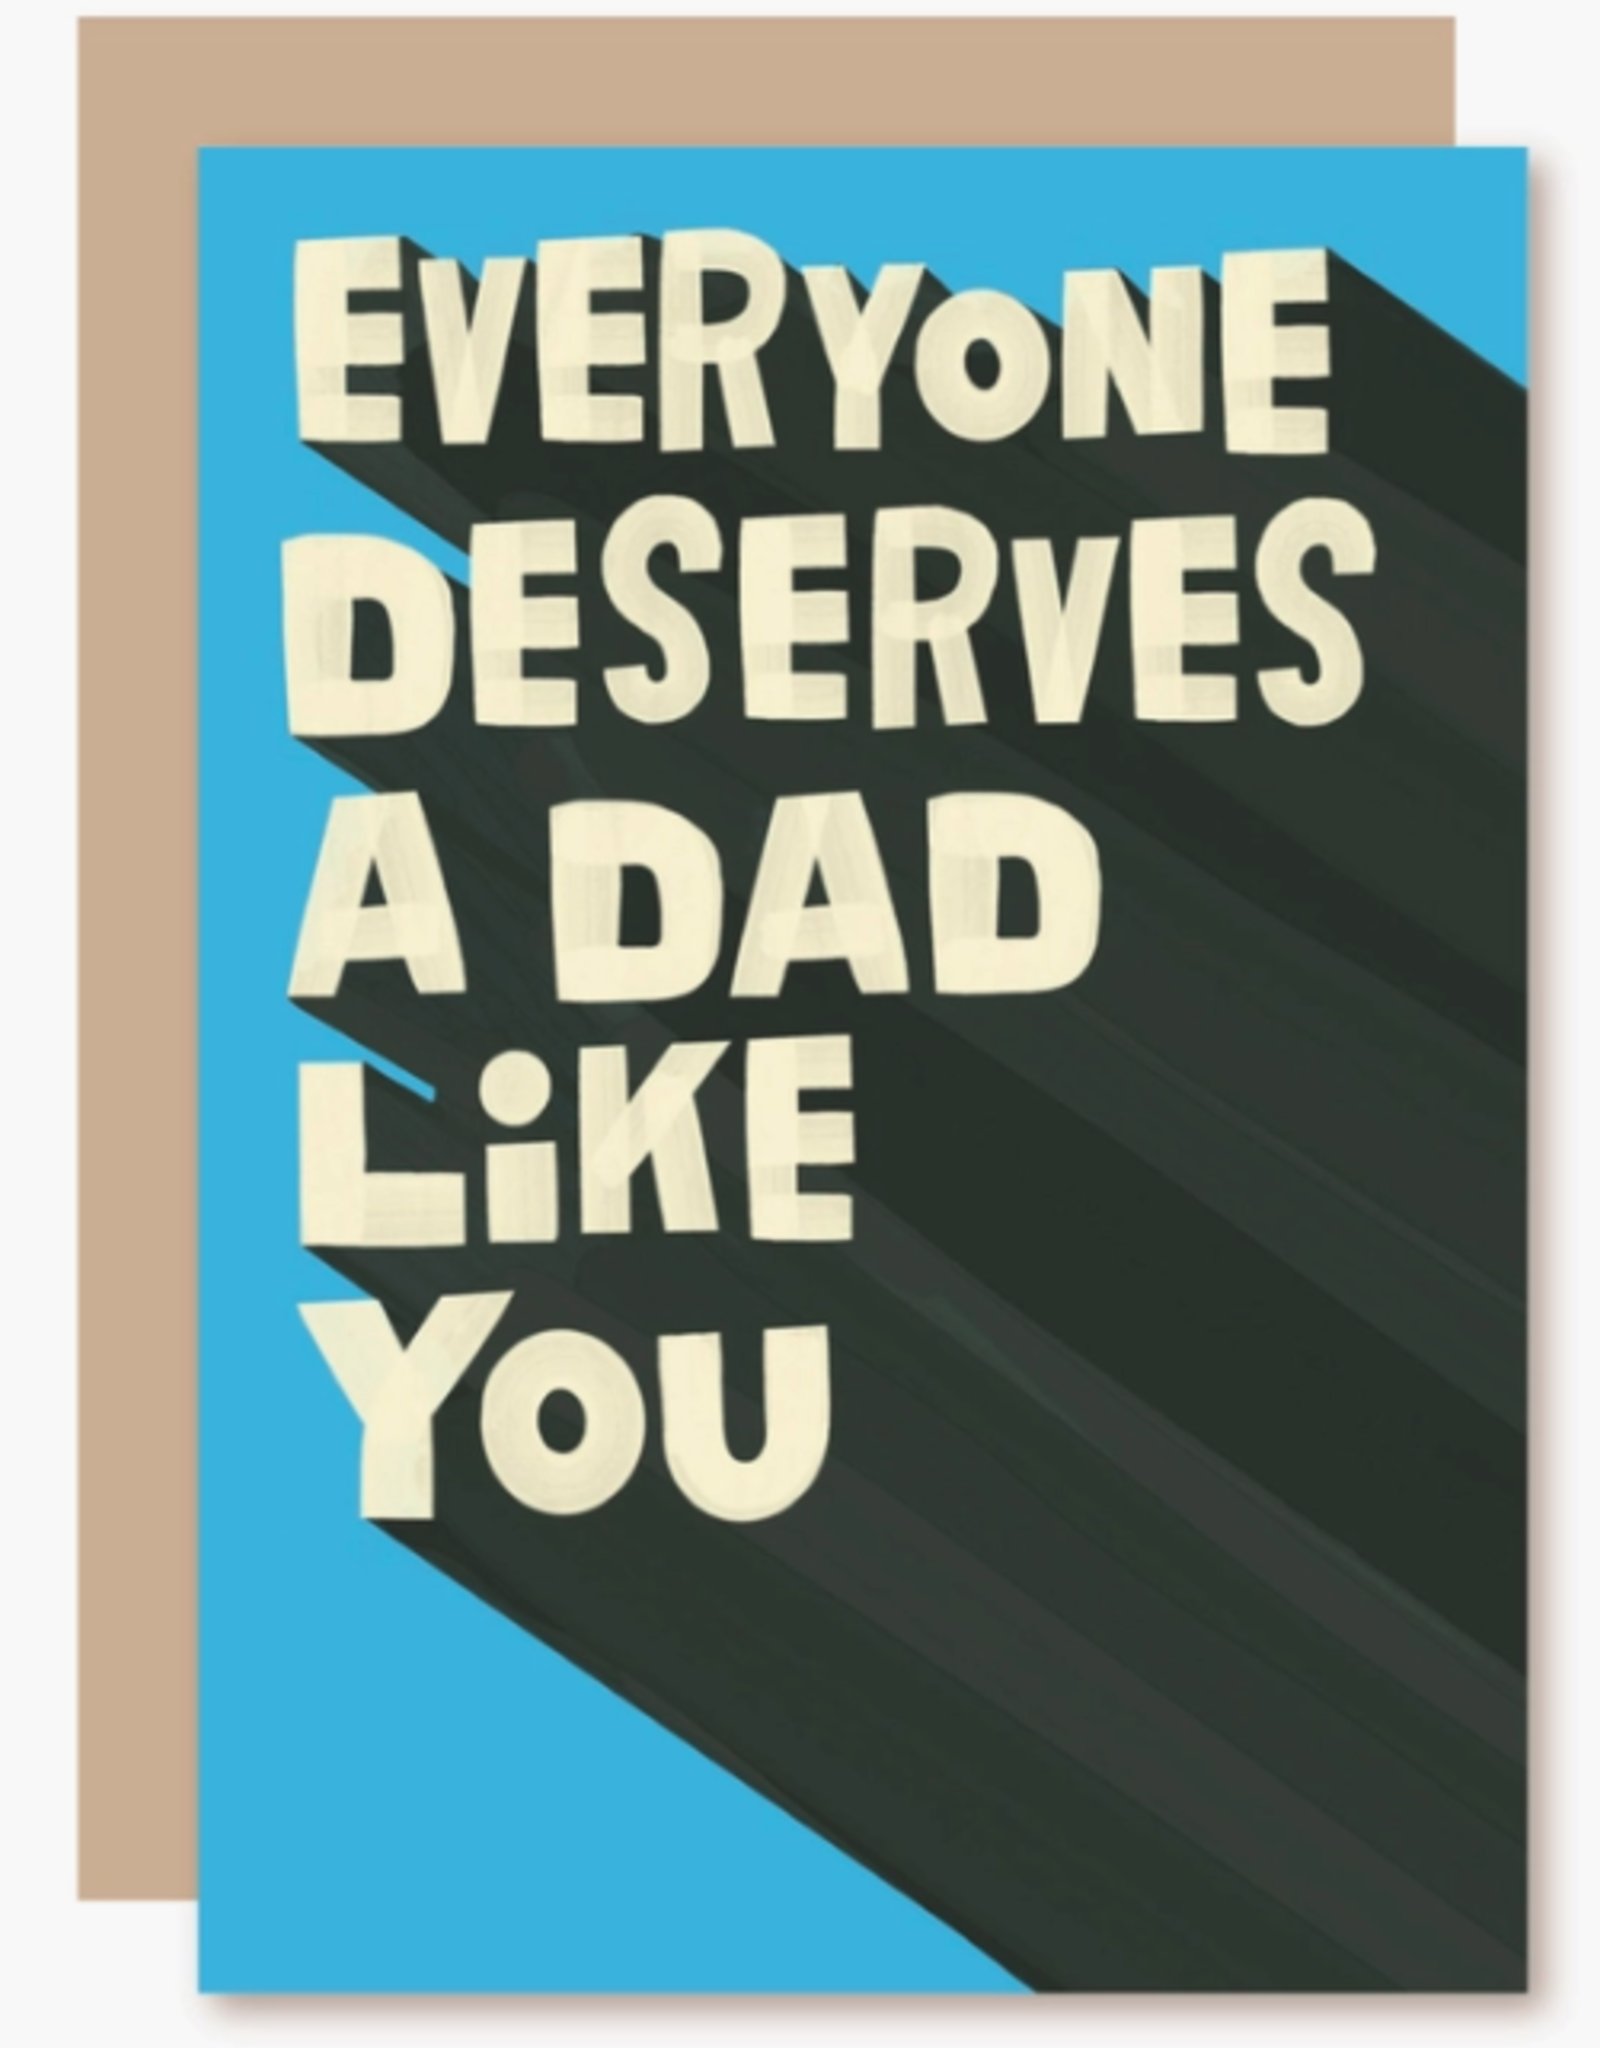 Deserves Father's Day Card